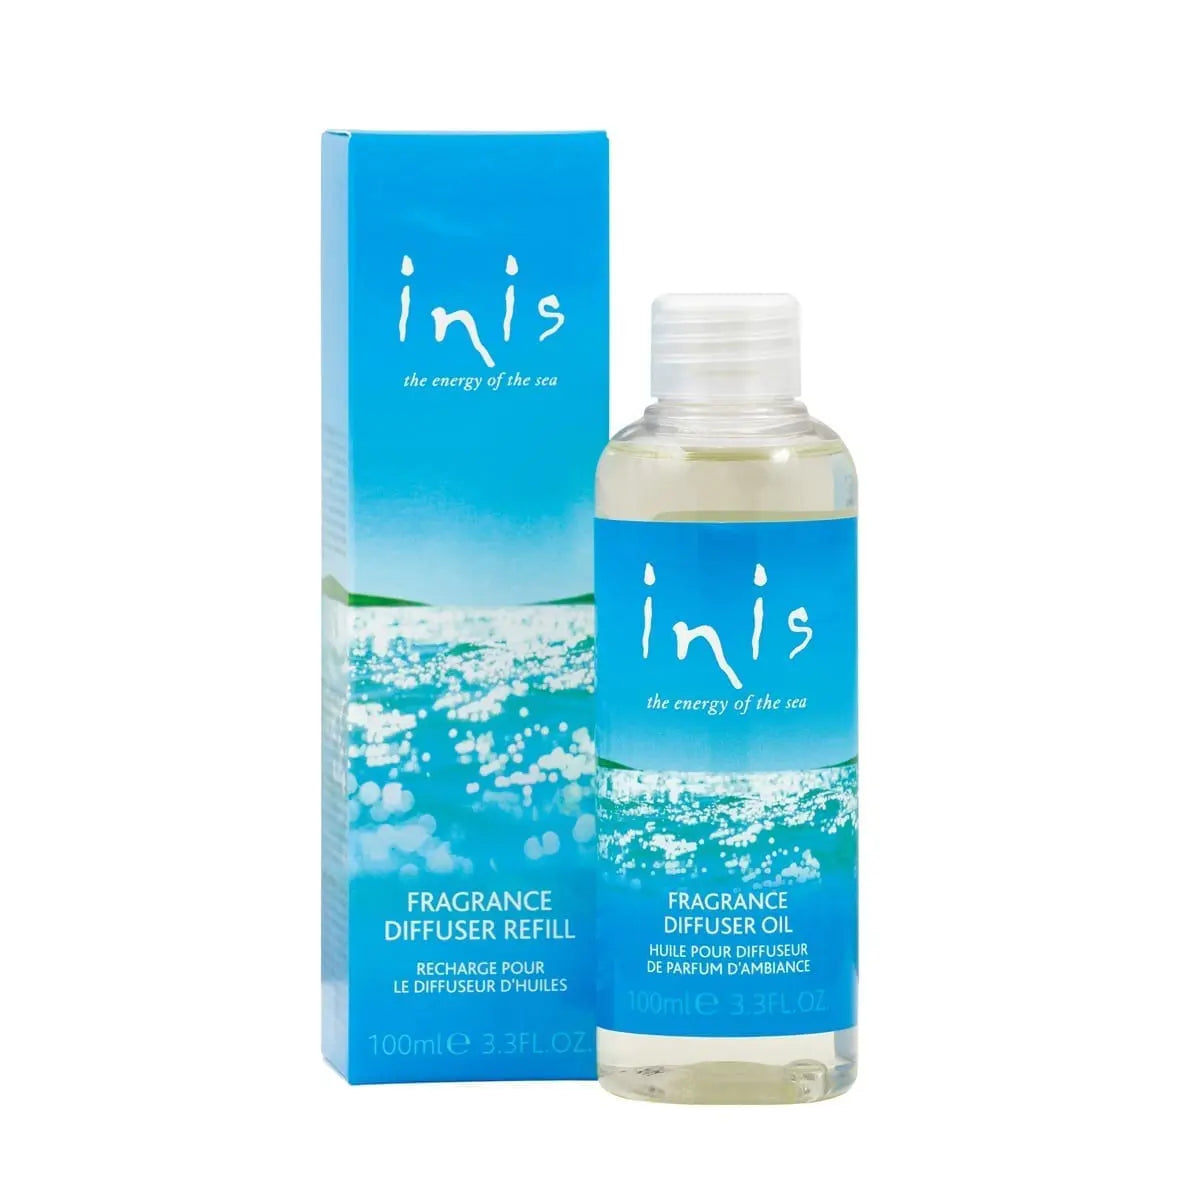 Inis- Fragrance Diffuser Refill